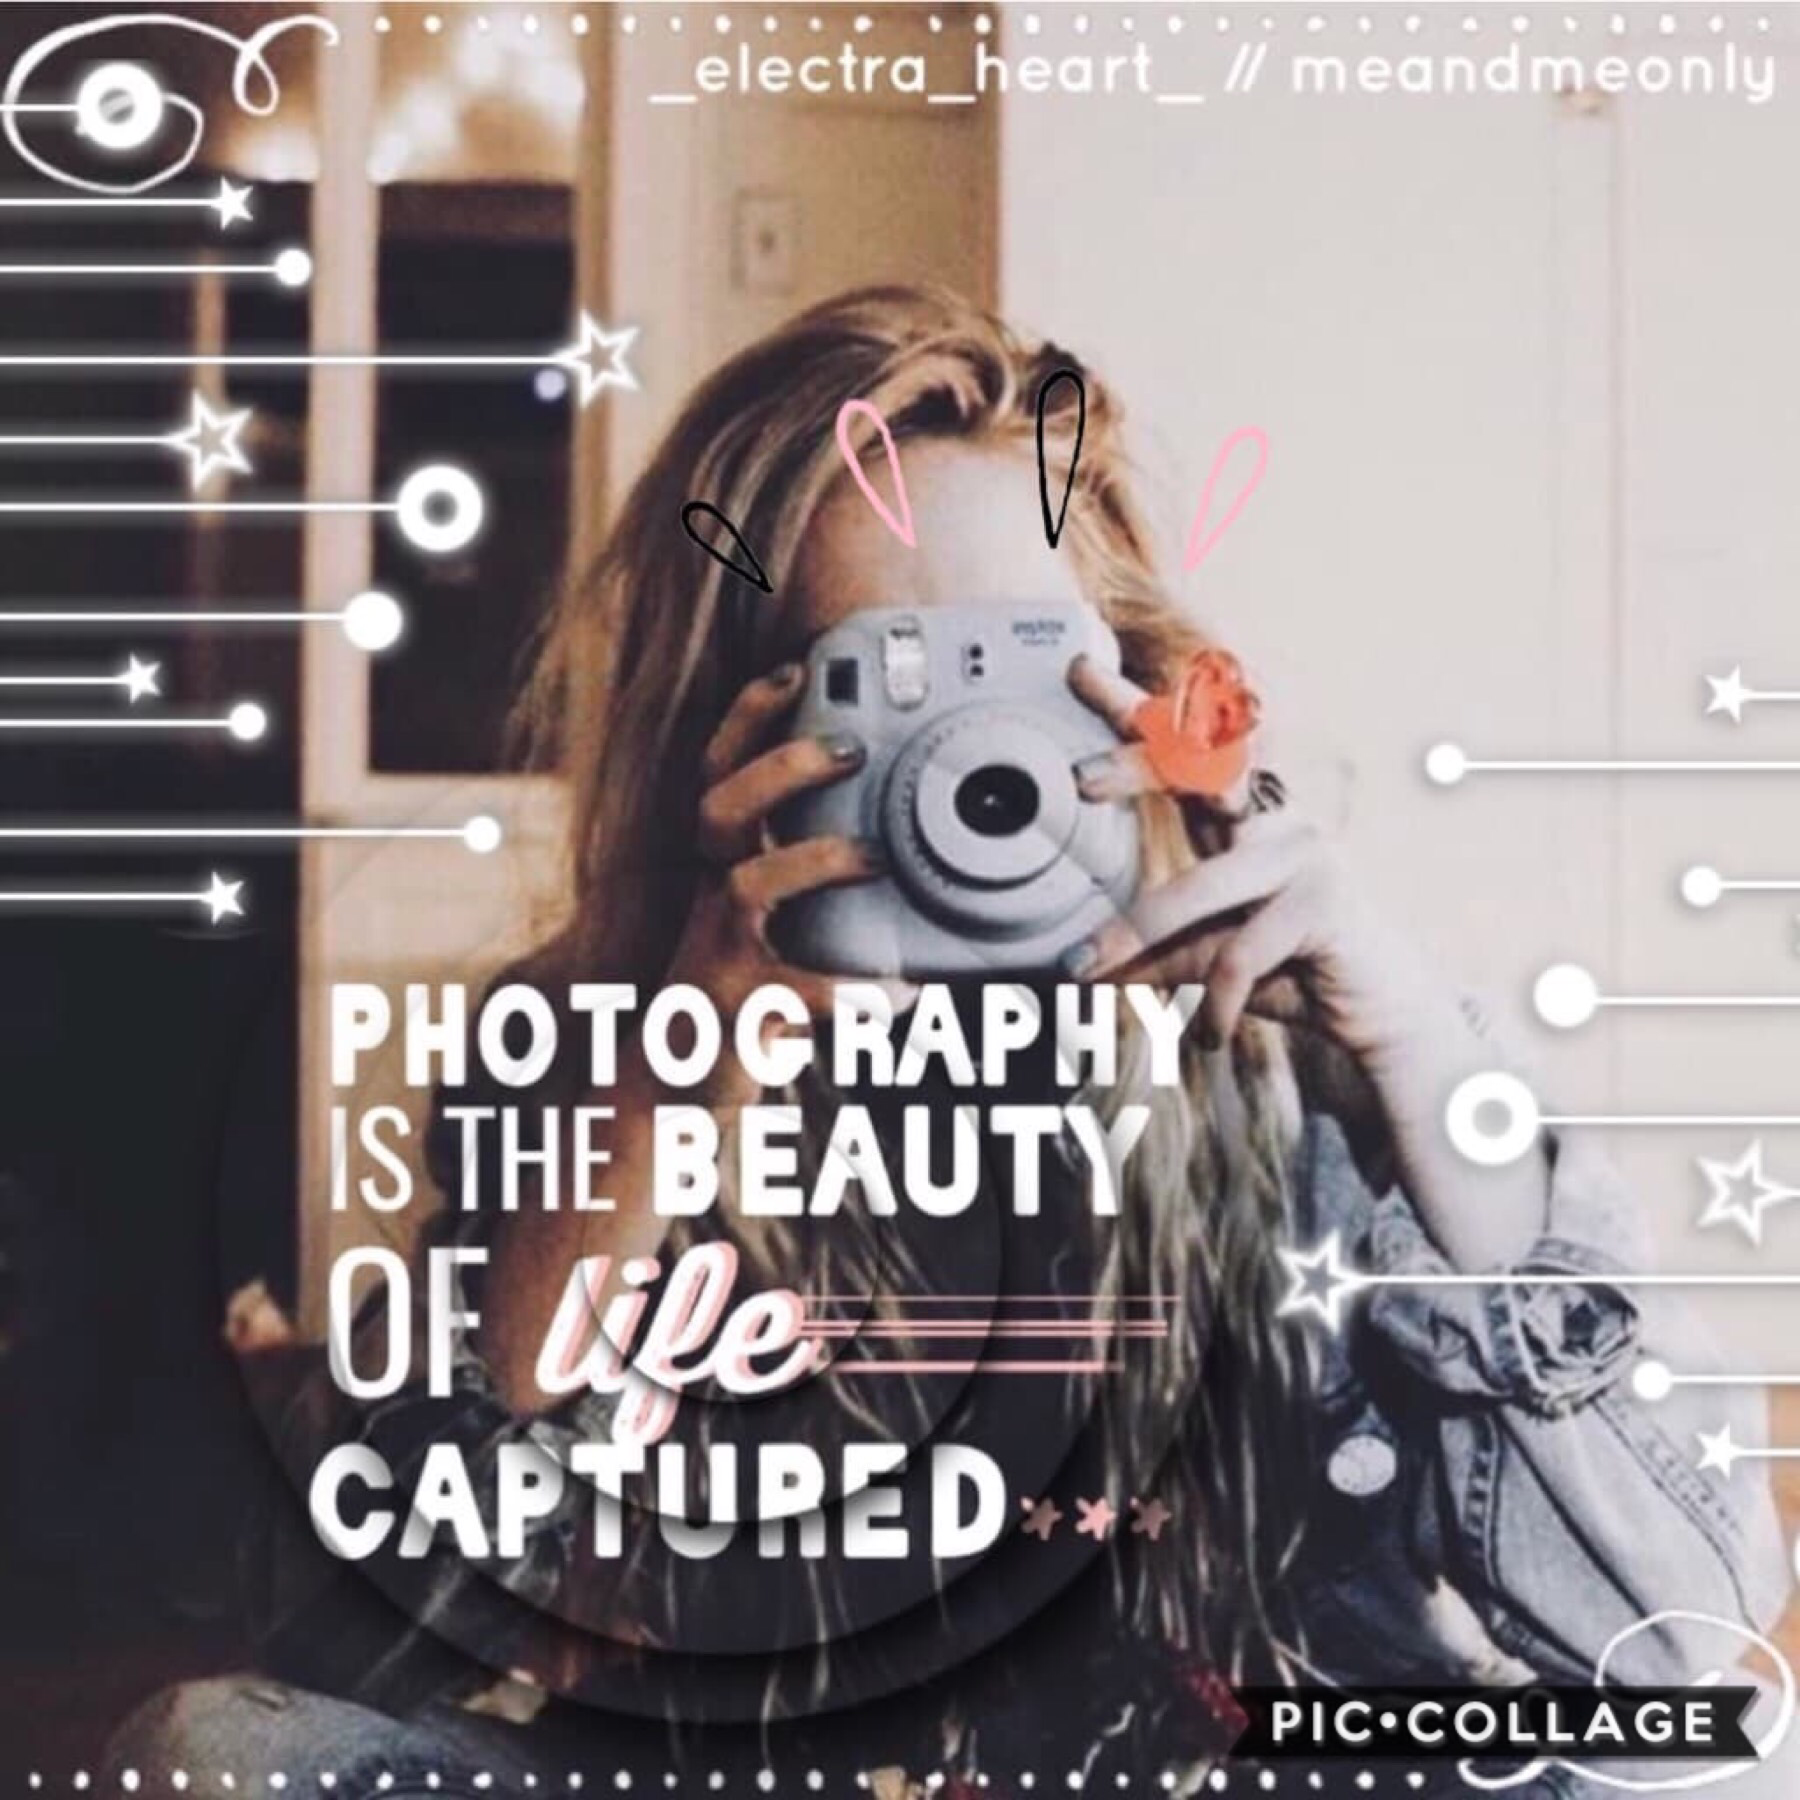 collab with another amazing queen 👑 
_electra_heart_ she did the designs and chose bg while I chose quote and did text! everyone go follow her, she posts the best collages and her account is amazing! QOTD: subject at school you are best at? AOTD: lol math